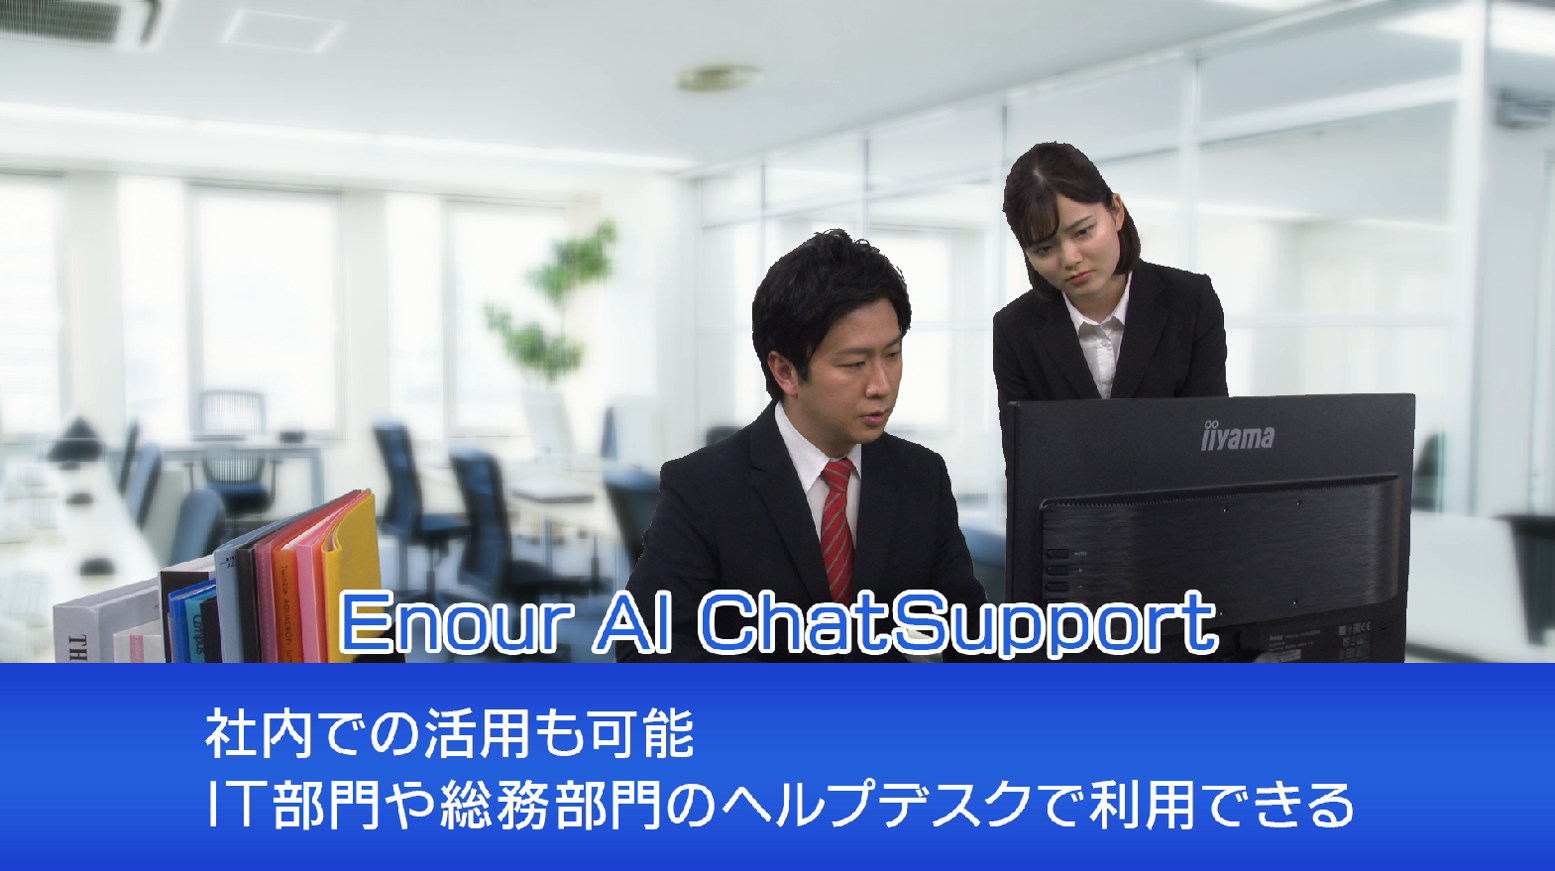 Enour AI ChatSupport（AIチャット）